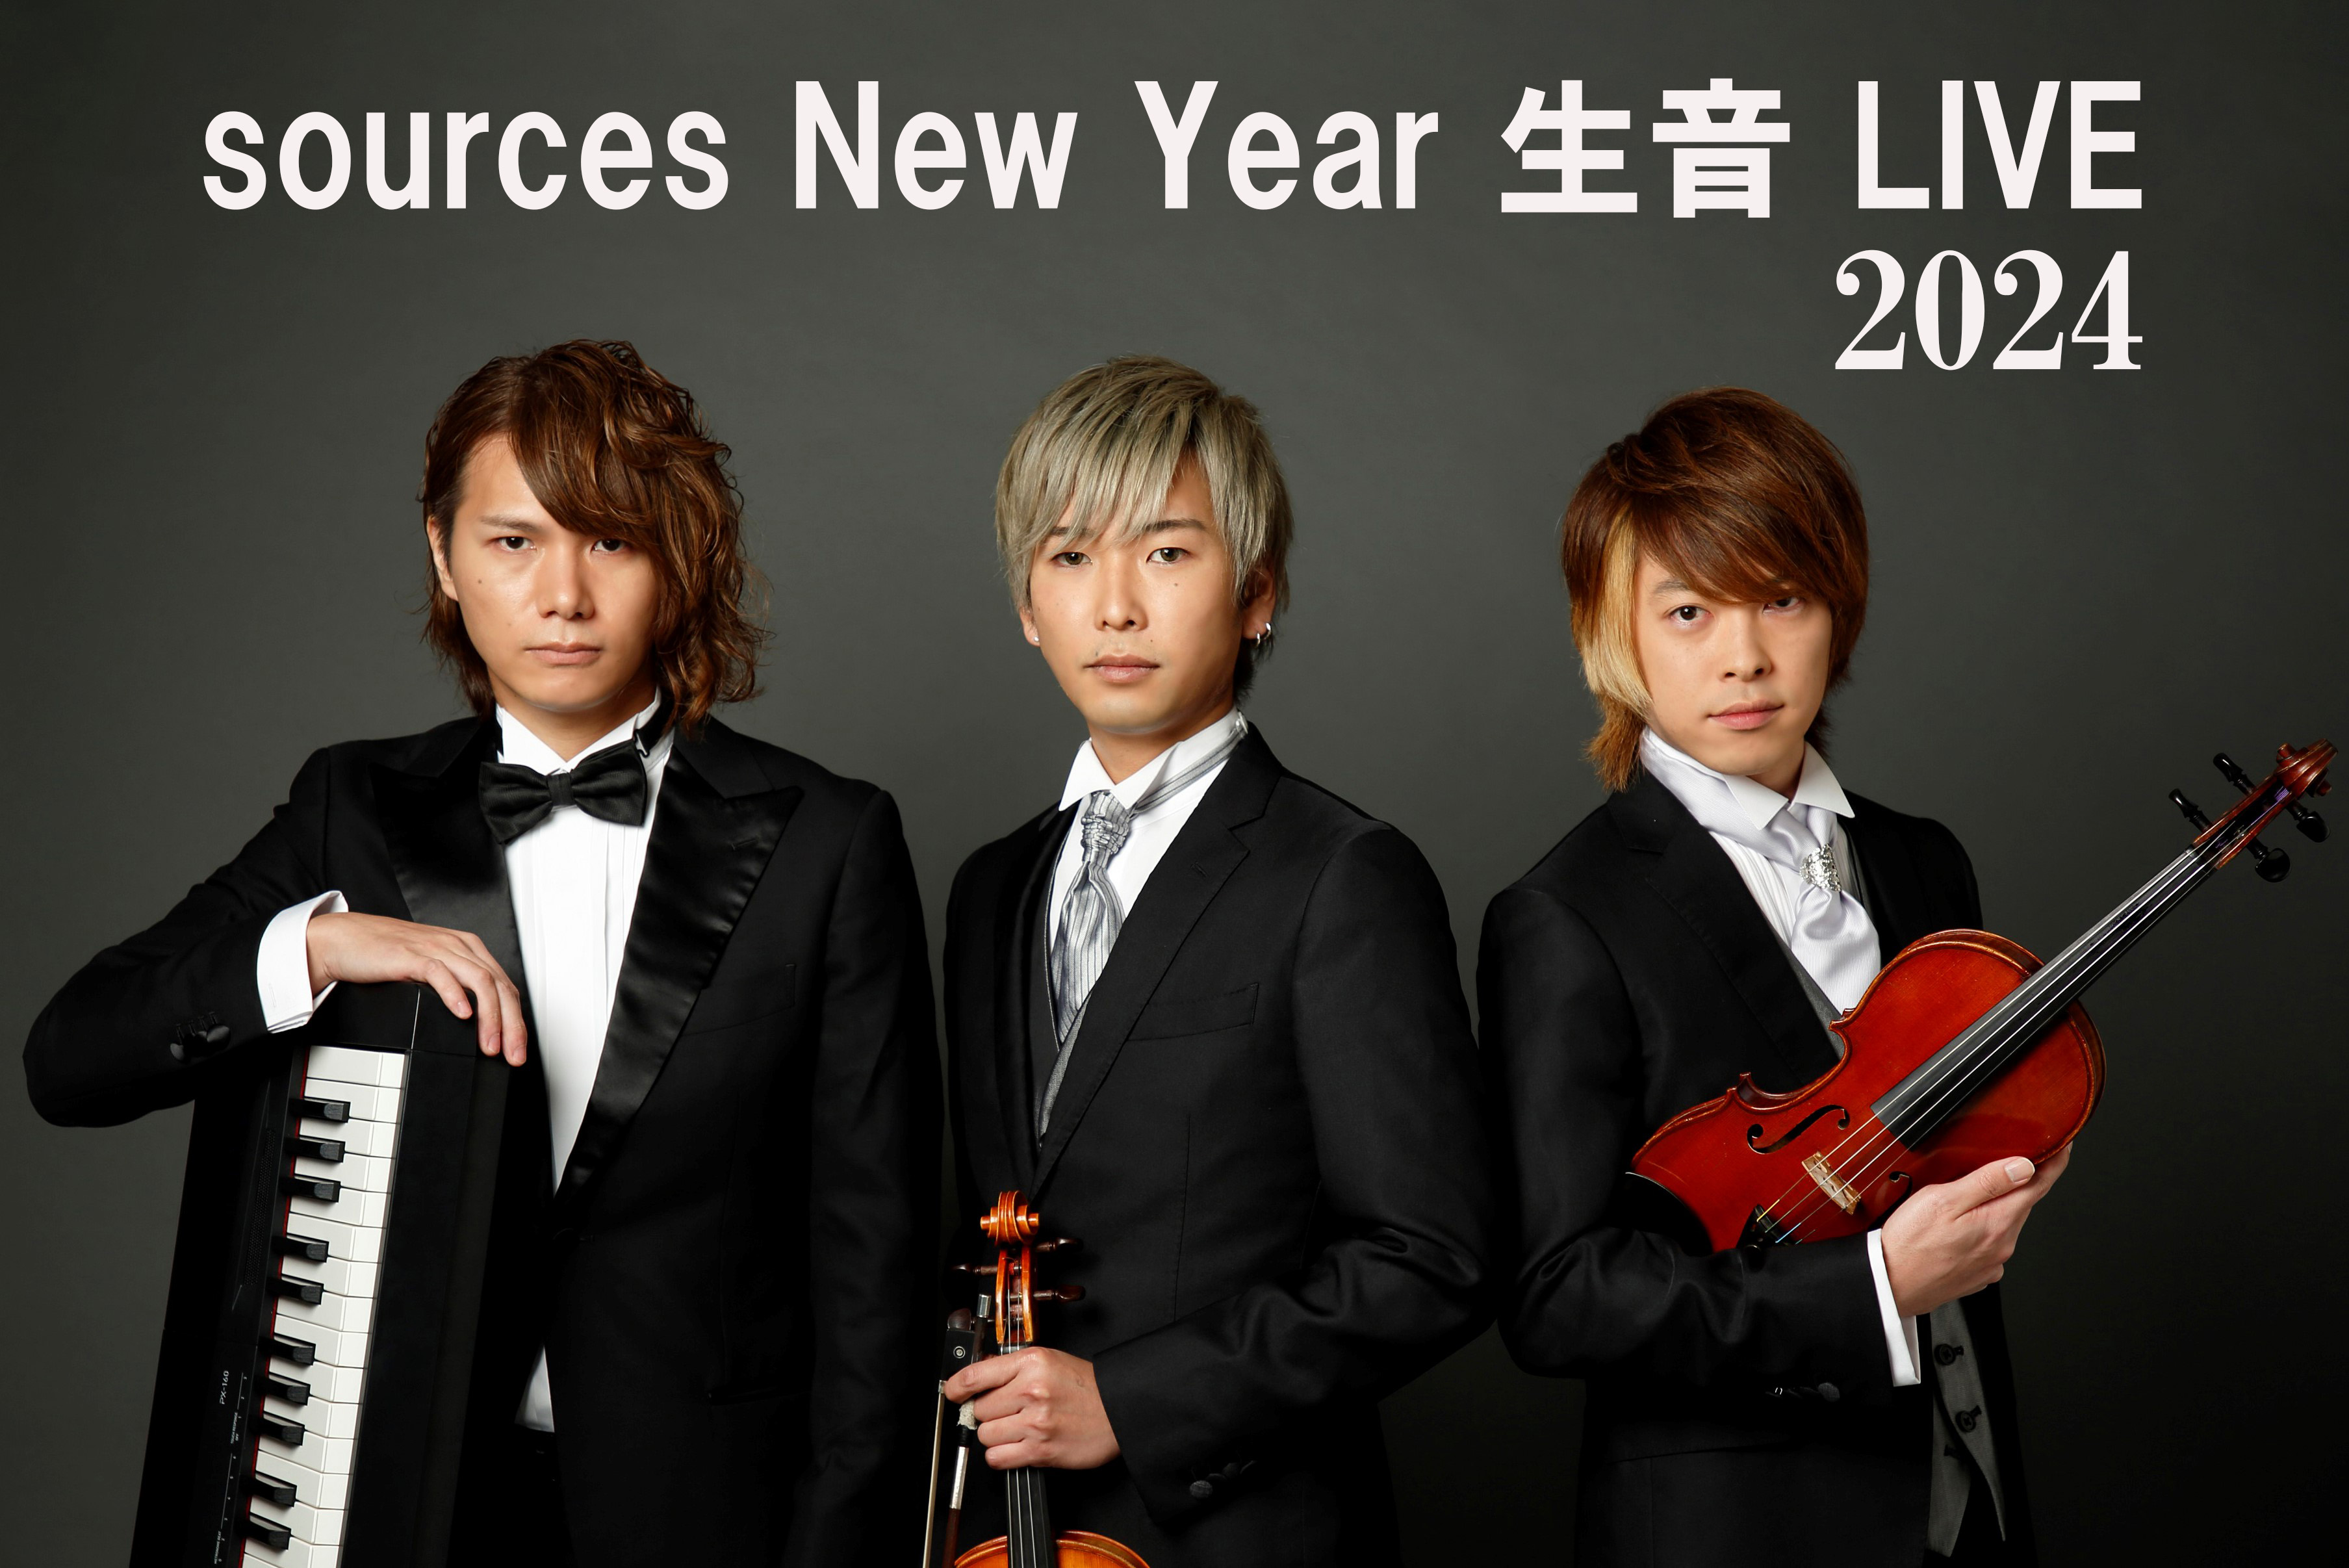 sources New Year 生音 LIVE 2024